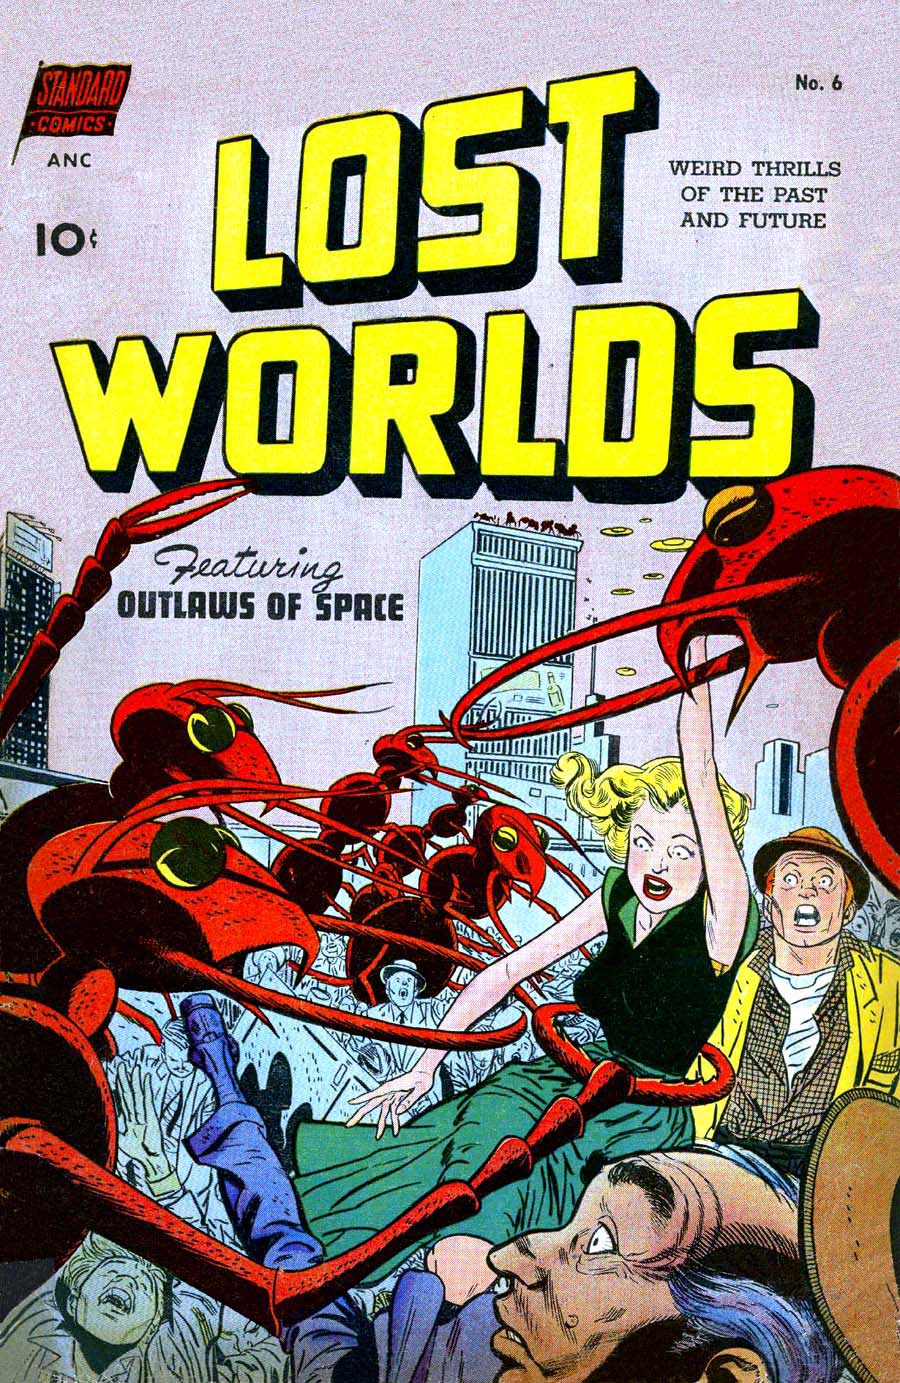 Lost Worlds v1 #6 standard 1950s science fiction comic book cover art by Alex Toth